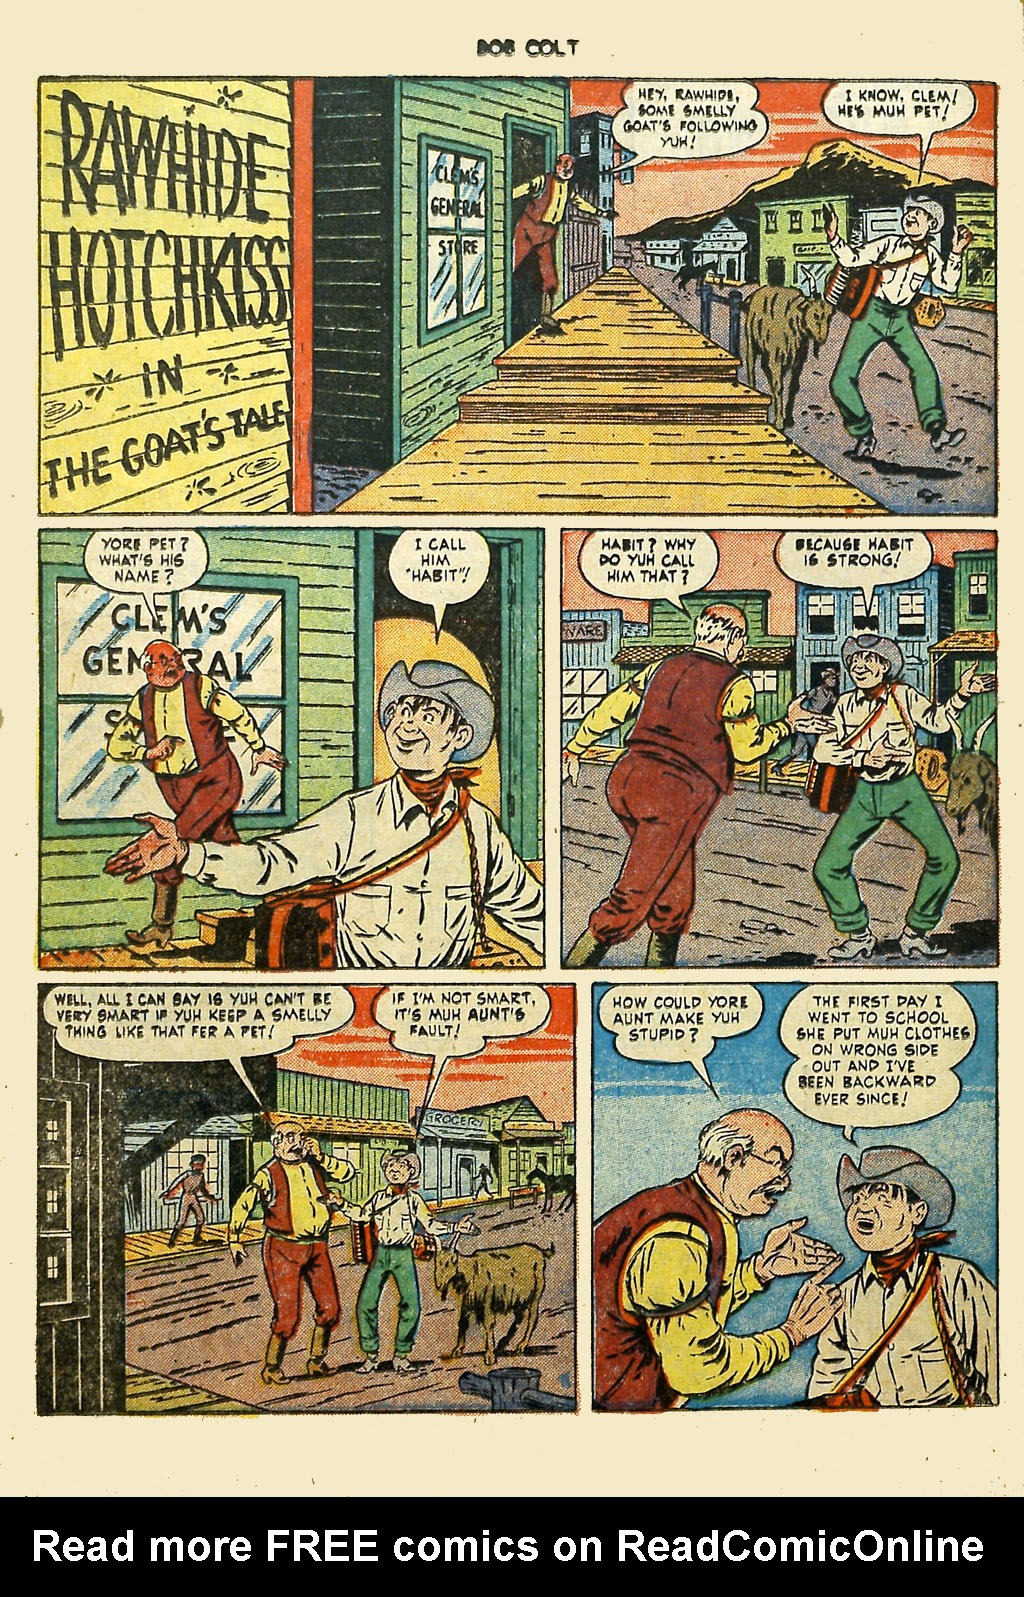 Read online Bob Colt Western comic -  Issue #2 - 24